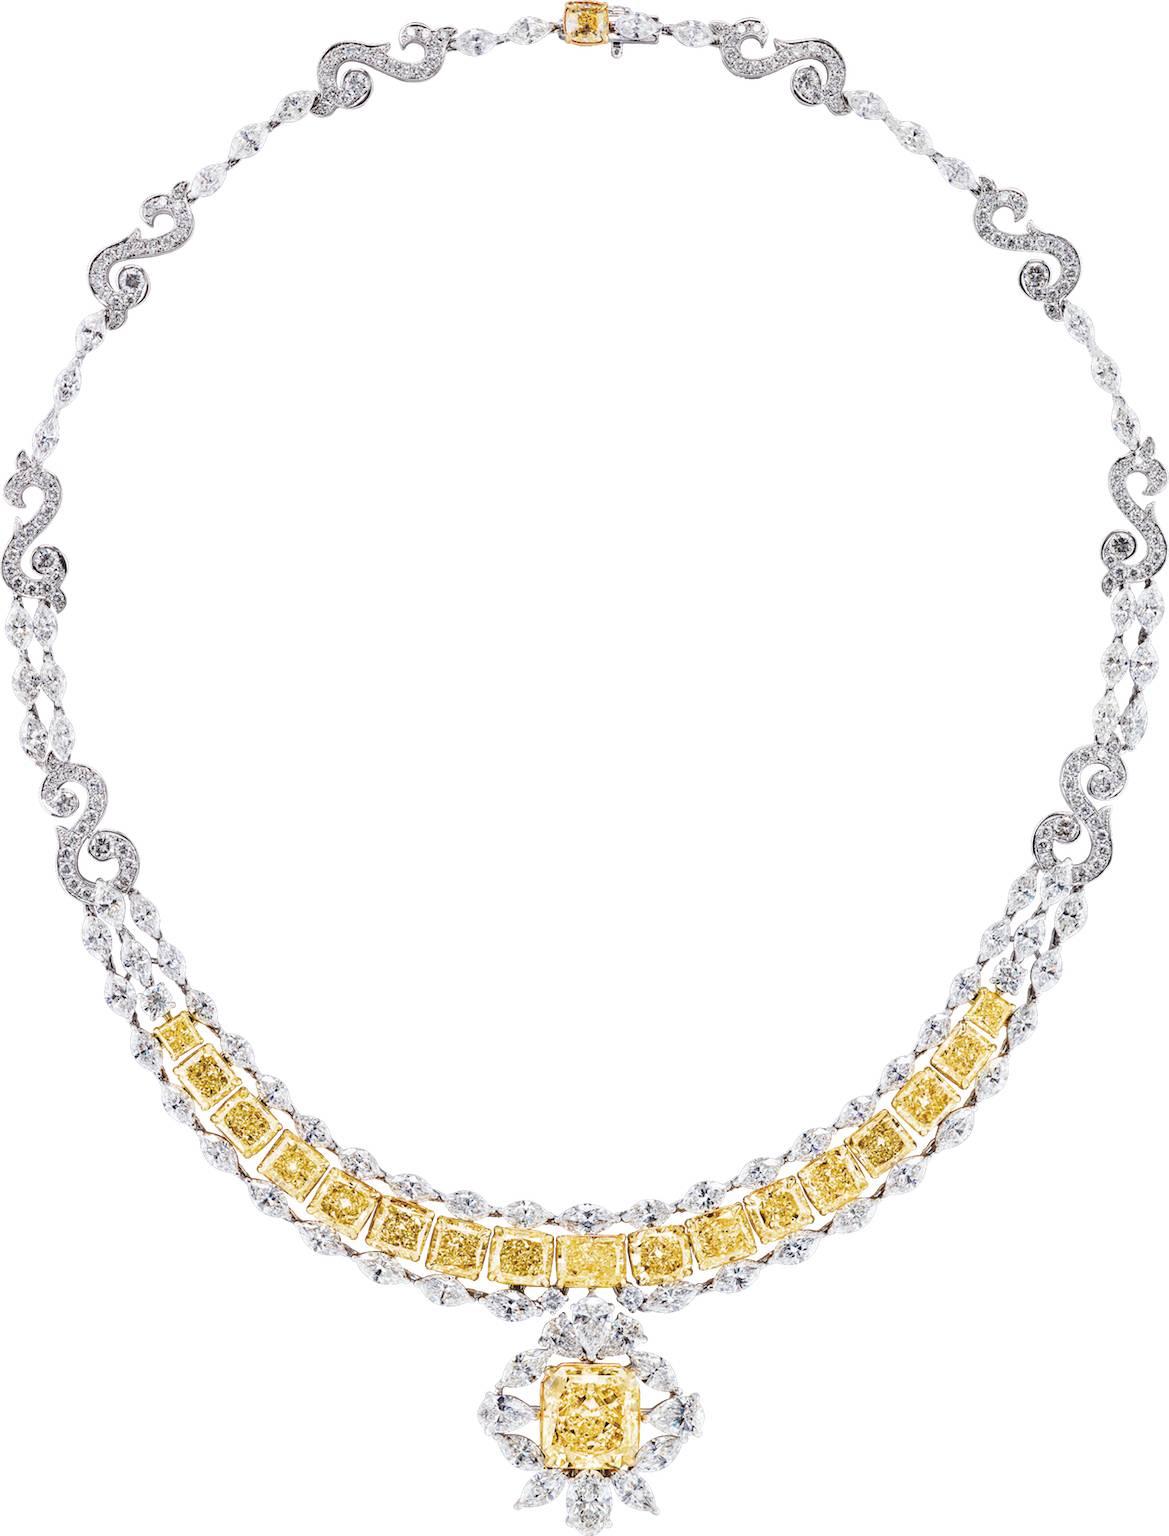 Centers an 8.12 carat brilliant-cut Fancy Yellow Diamond of “VVS1” clarity, and contains another 19.63 carats of radiant-cut Fancy Yellow Diamonds that range from “VVS1-VS2” clarity.

Necklace also contains 24.06 carats of white diamonds, their cuts